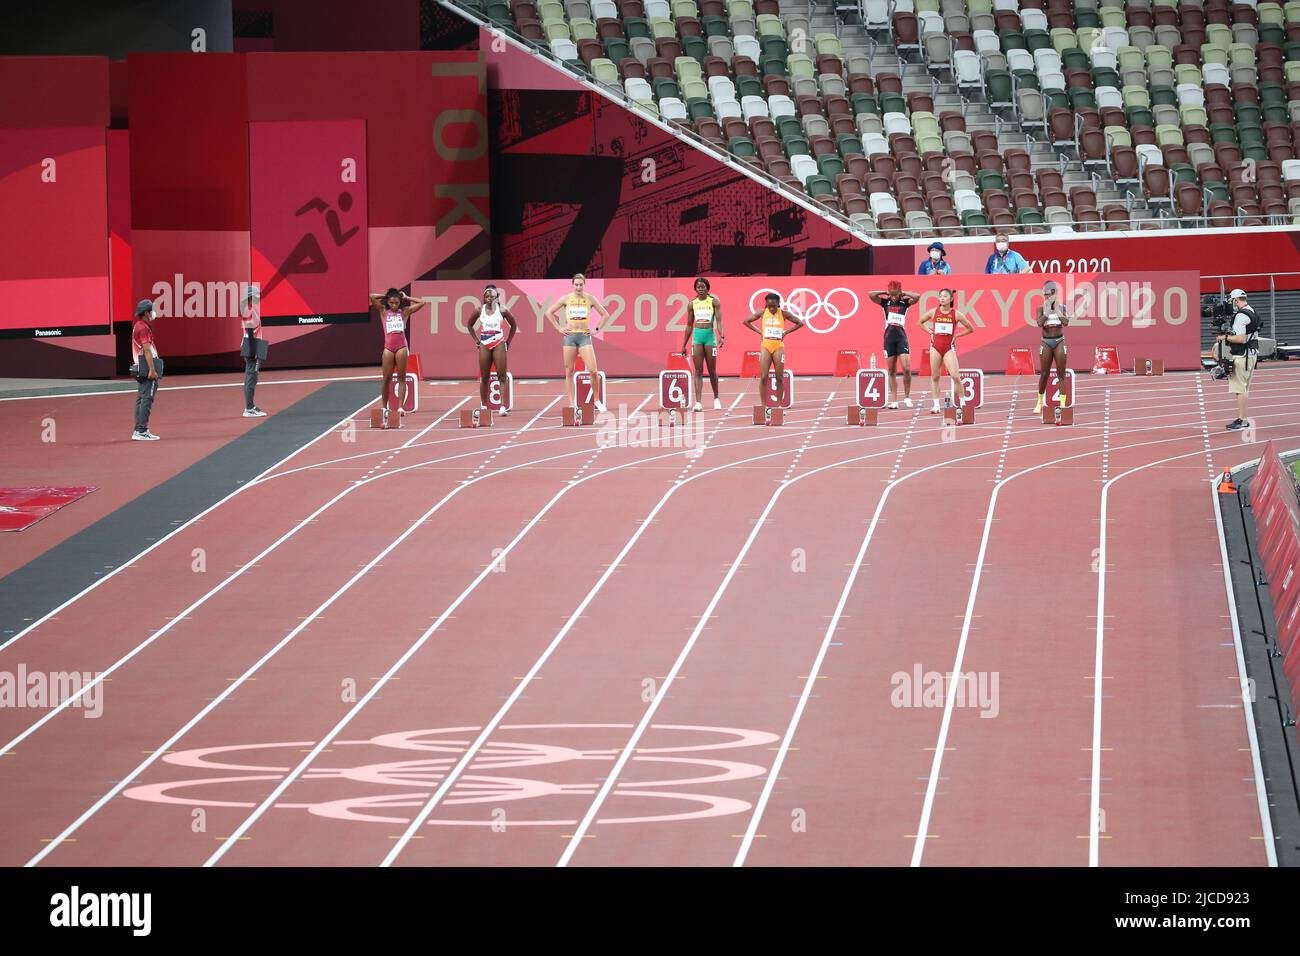 JULY 31st, 2021 - TOKYO, JAPAN: Women's 100m Semi-Final 2 at the Tokyo 2020 Olympic Games (Photo: Mickael Chavet/RX) Stock Photo